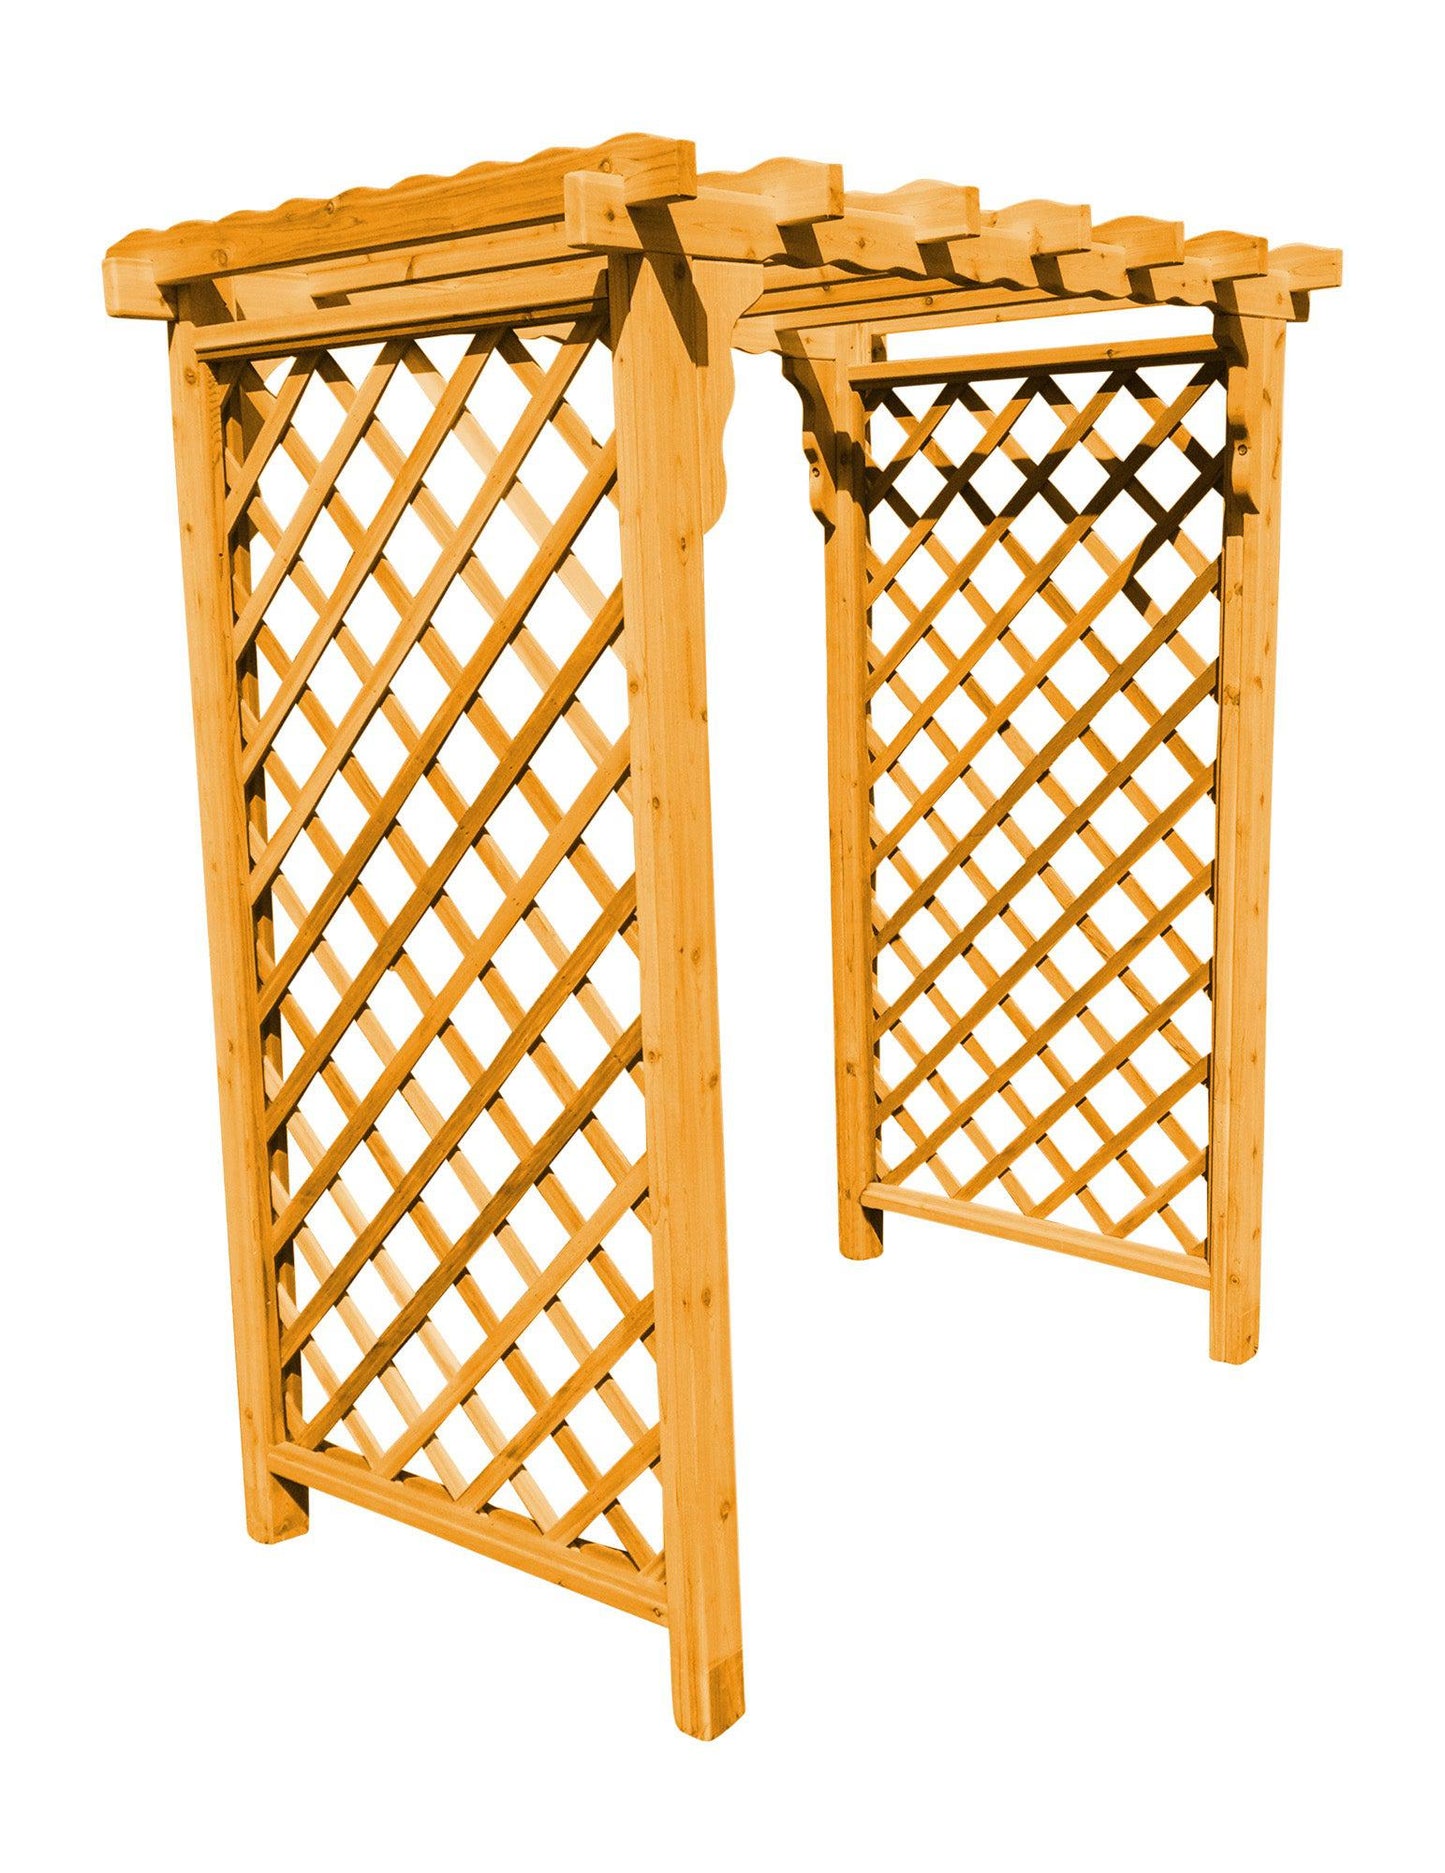 A&L Furniture Co. Western Red Cedar 4' Covington Arbor - LEAD TIME TO SHIP 2 WEEKS